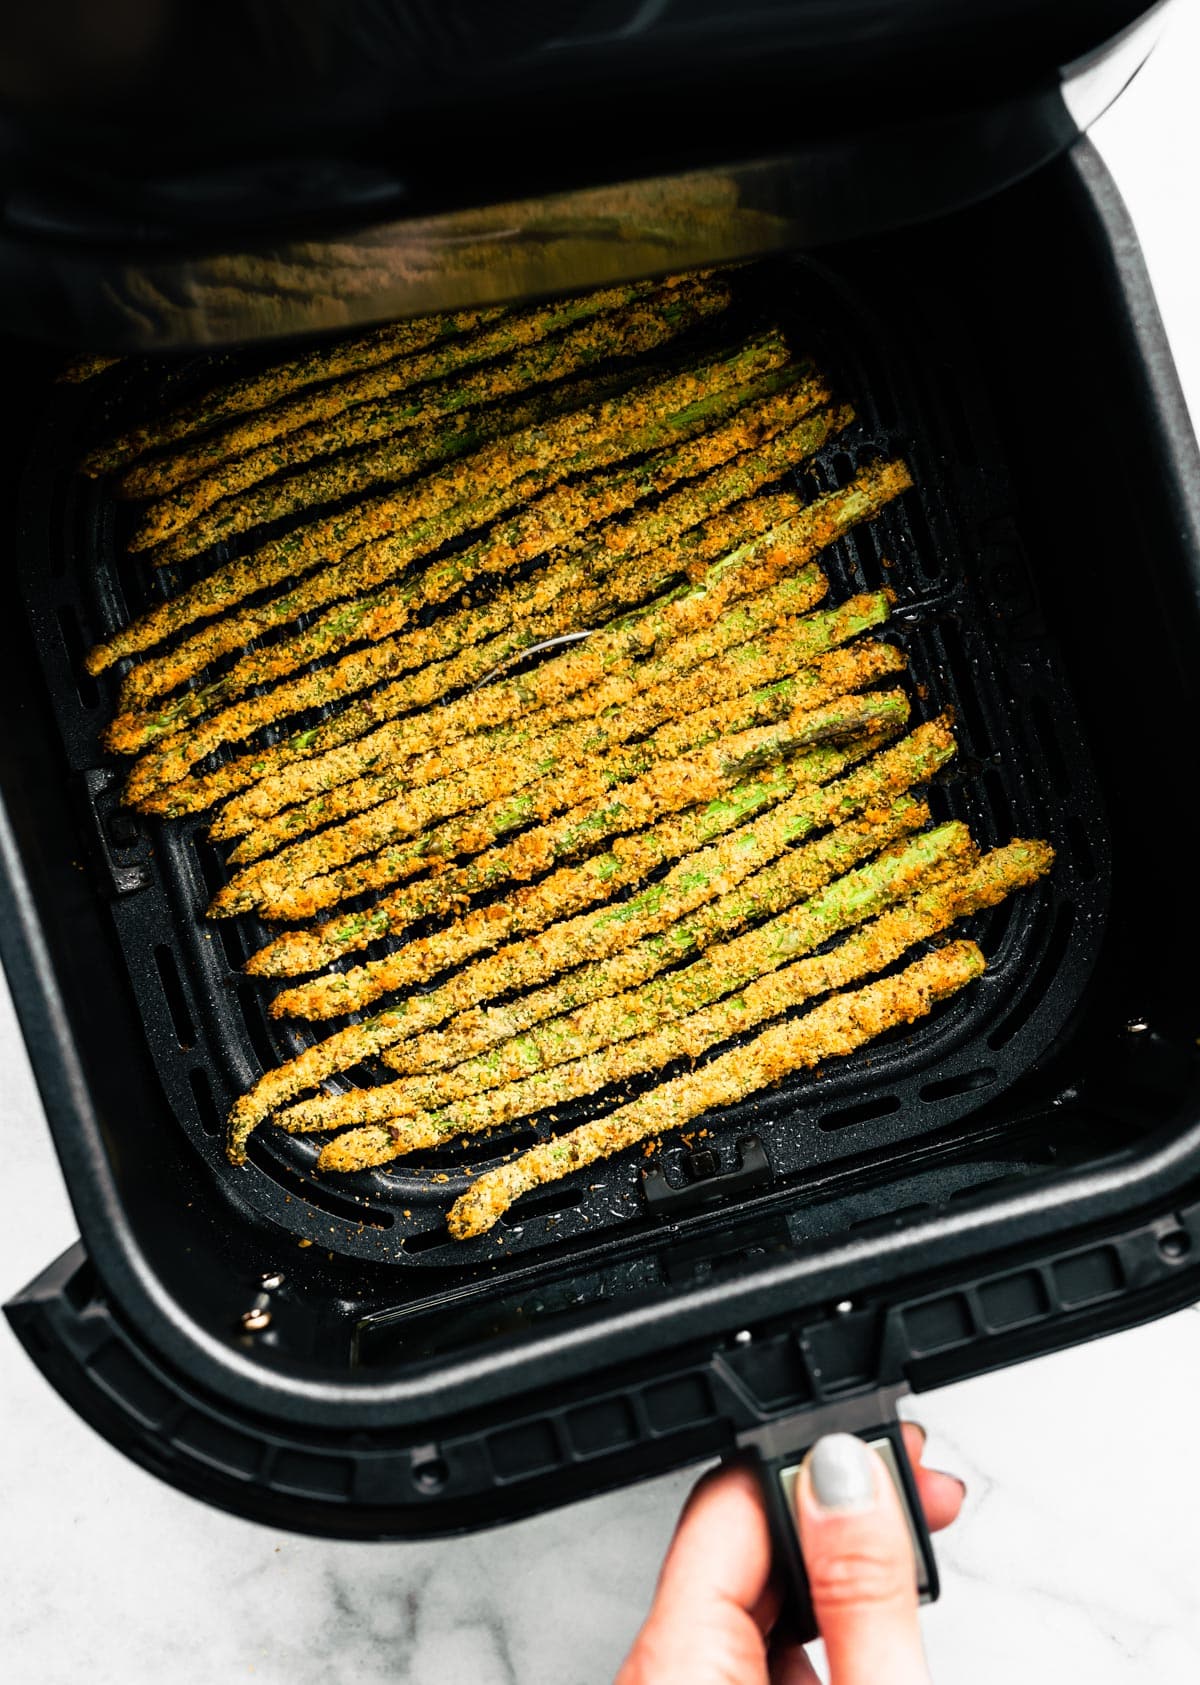 A hand holding an air fryer basket full of parmesan coated asparagus fries.